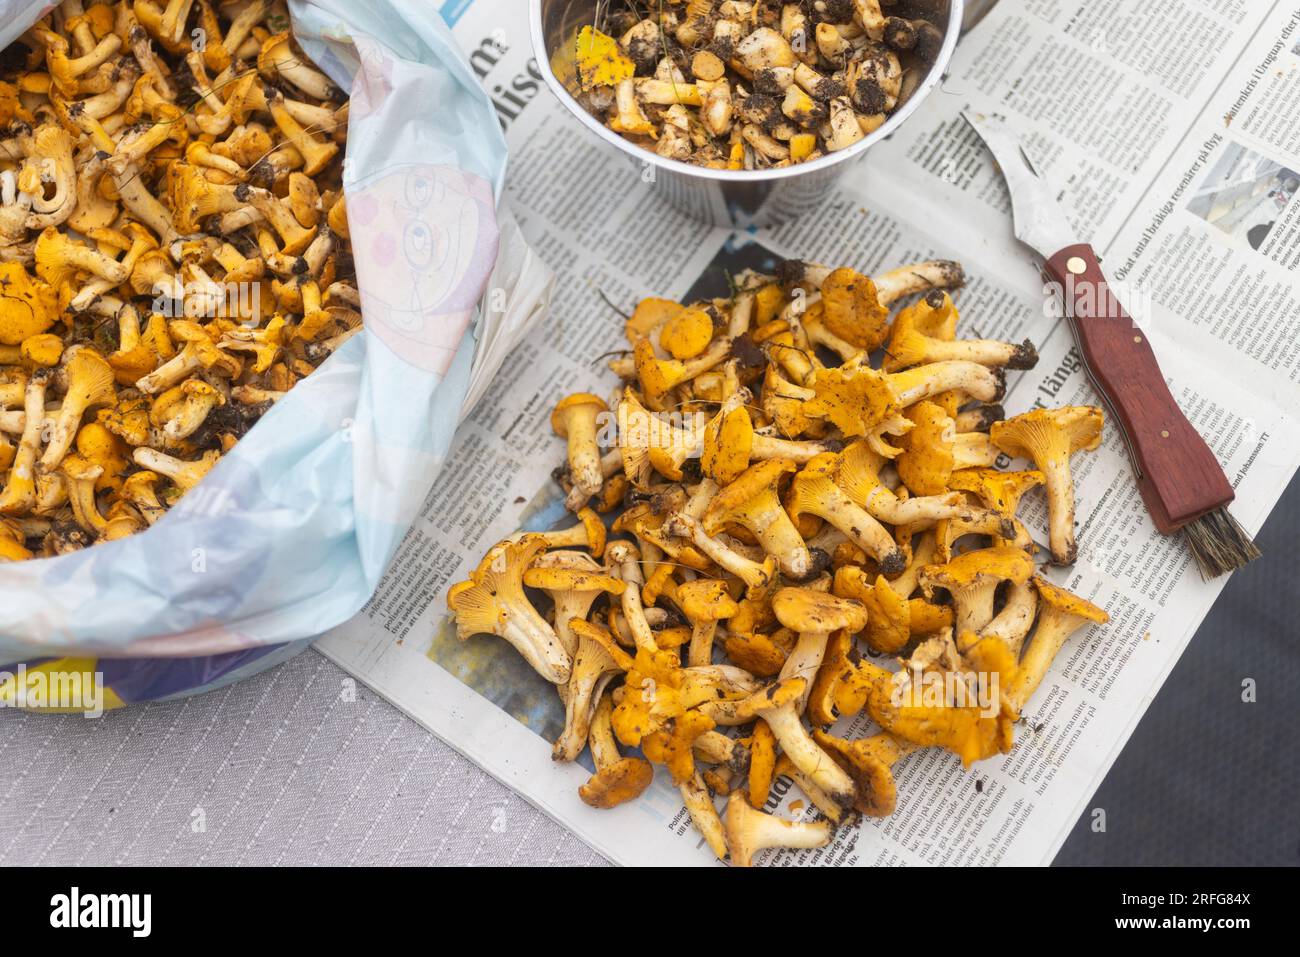 Freshly picked chanterelles (Cantharellus cibarius) to be cleaned. Cantharellus cibarius is a species of golden chanterelle mushroom in the genus Cantharellus. Stock Photo